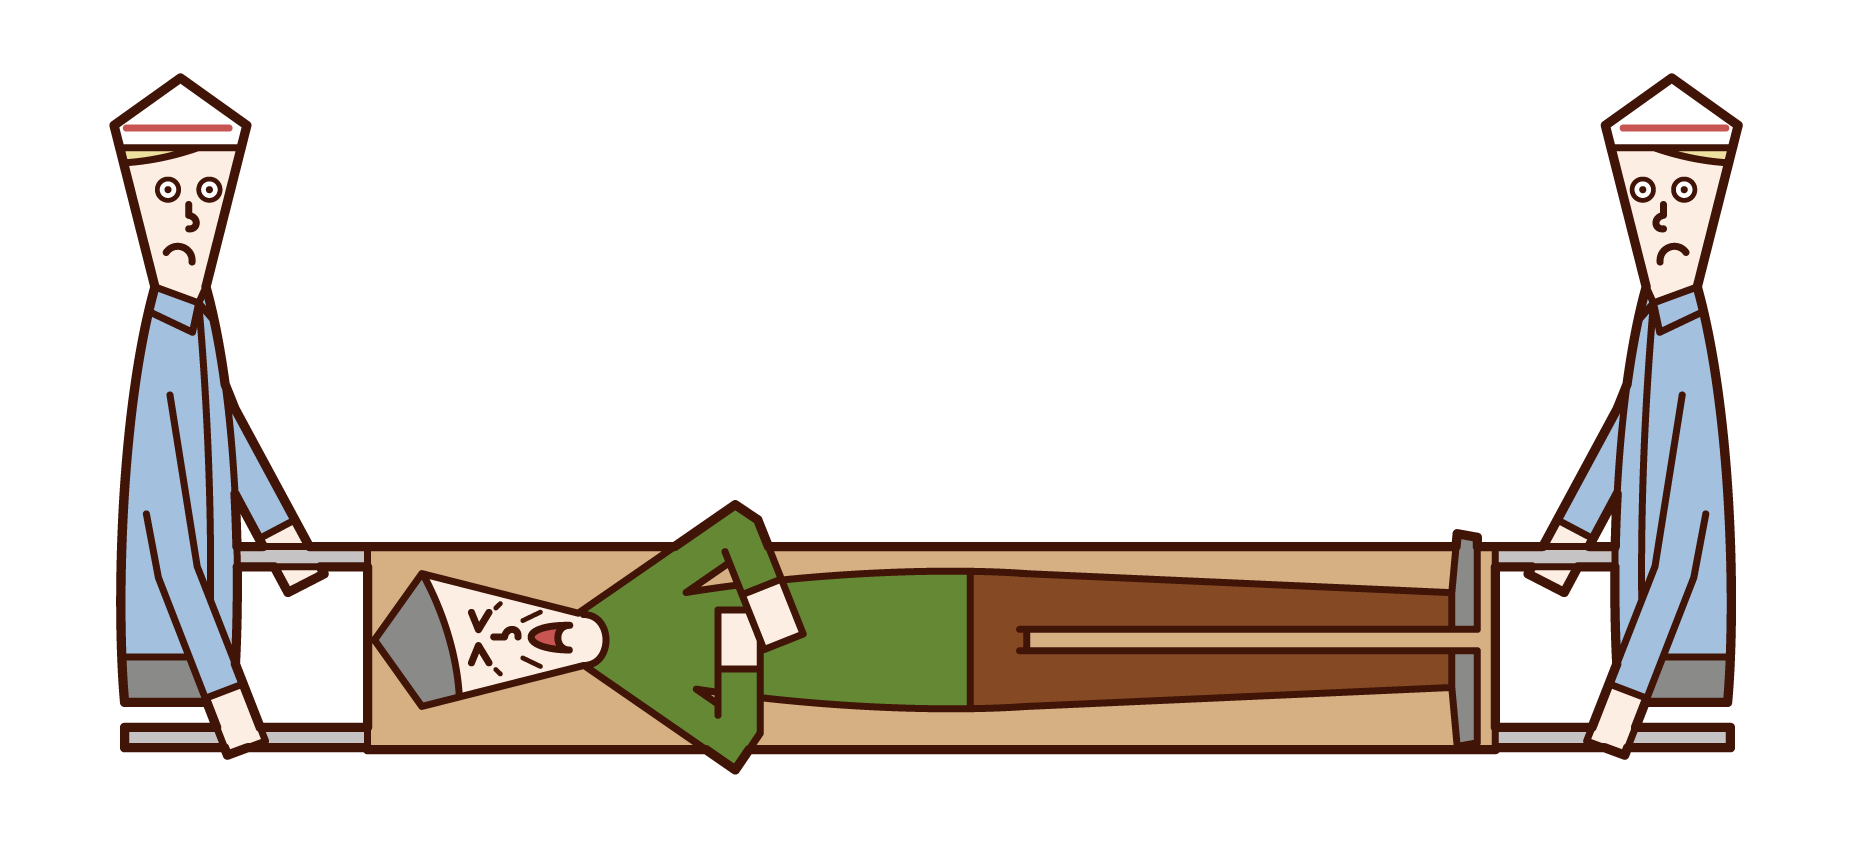 Illustration of a person (grandfather) carried on a stretcher